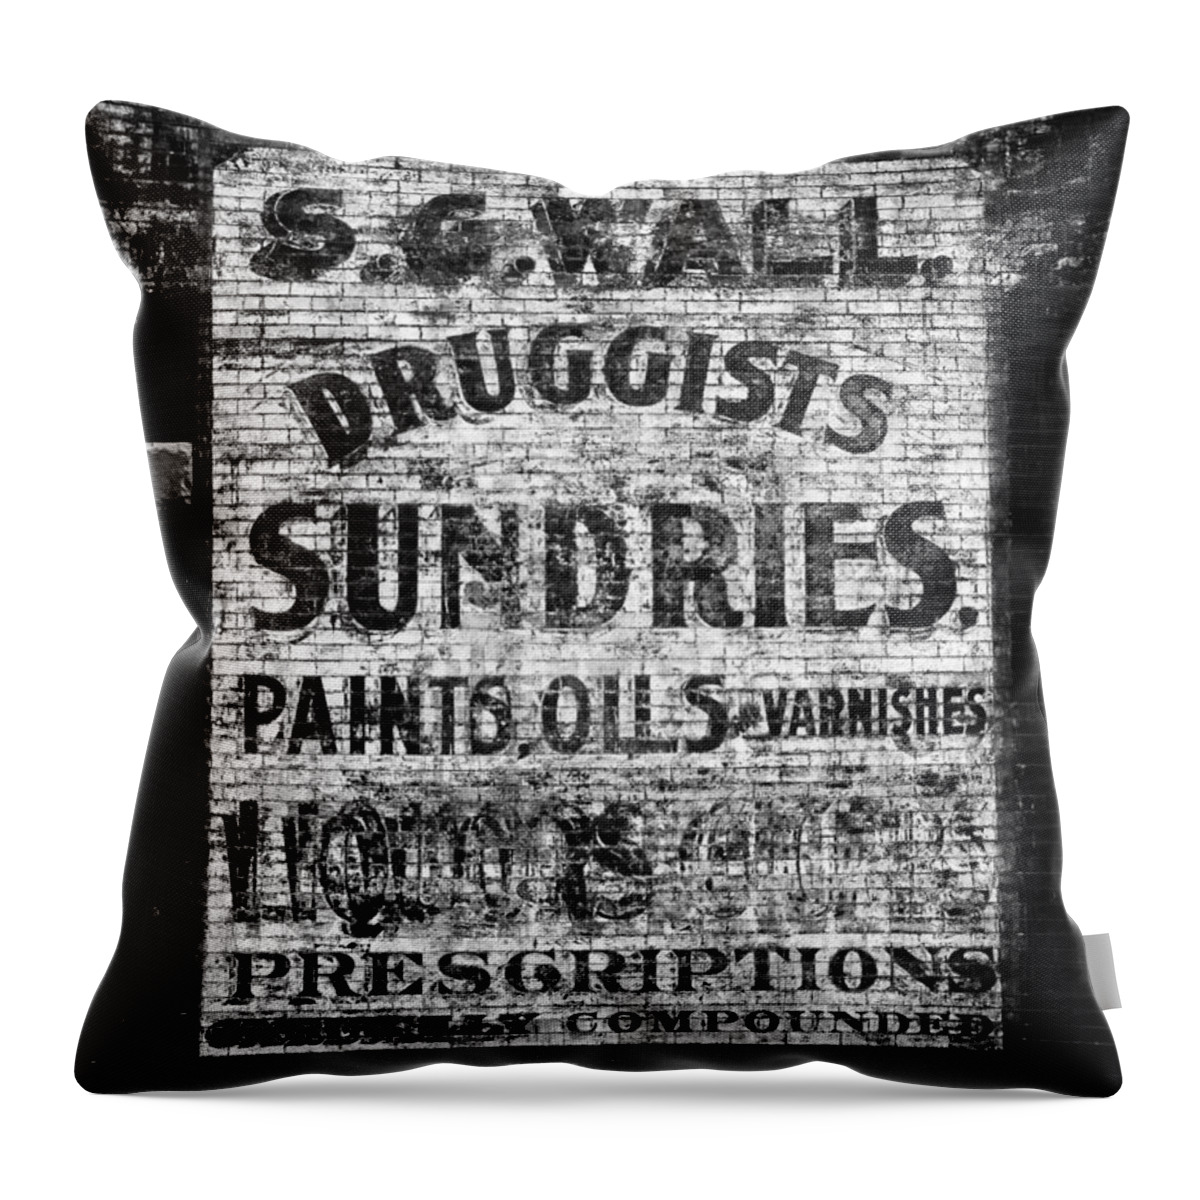 Americana Throw Pillow featuring the photograph Americana Faded Old Brick Wall Drug Store Sign Black and White by Shawn O'Brien